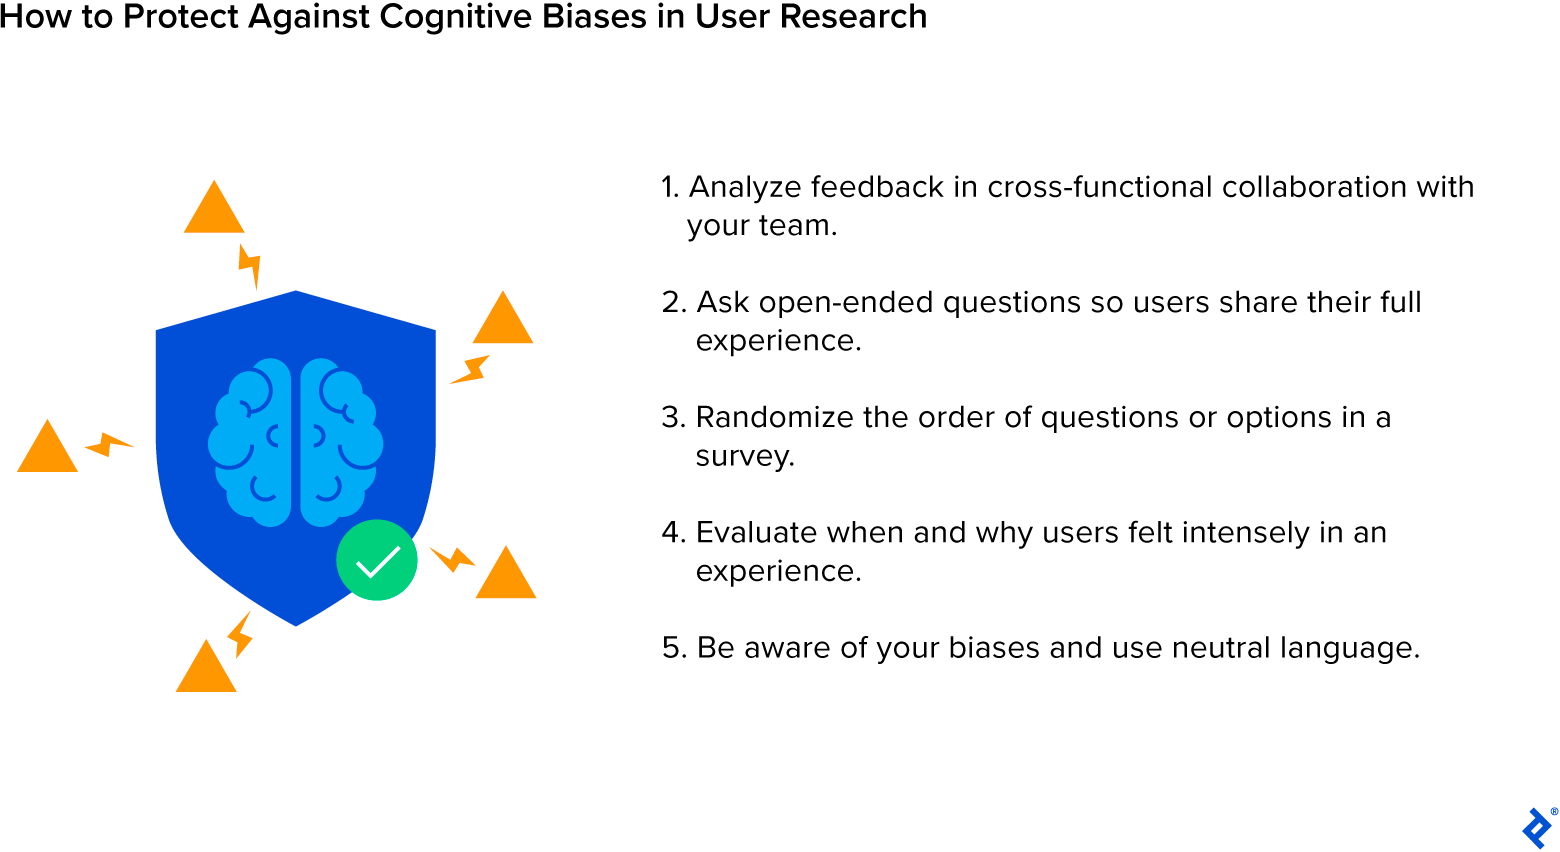 Five ways to protect against cognitive biases in user research, include asking open-ended questions and randomizing list orders.